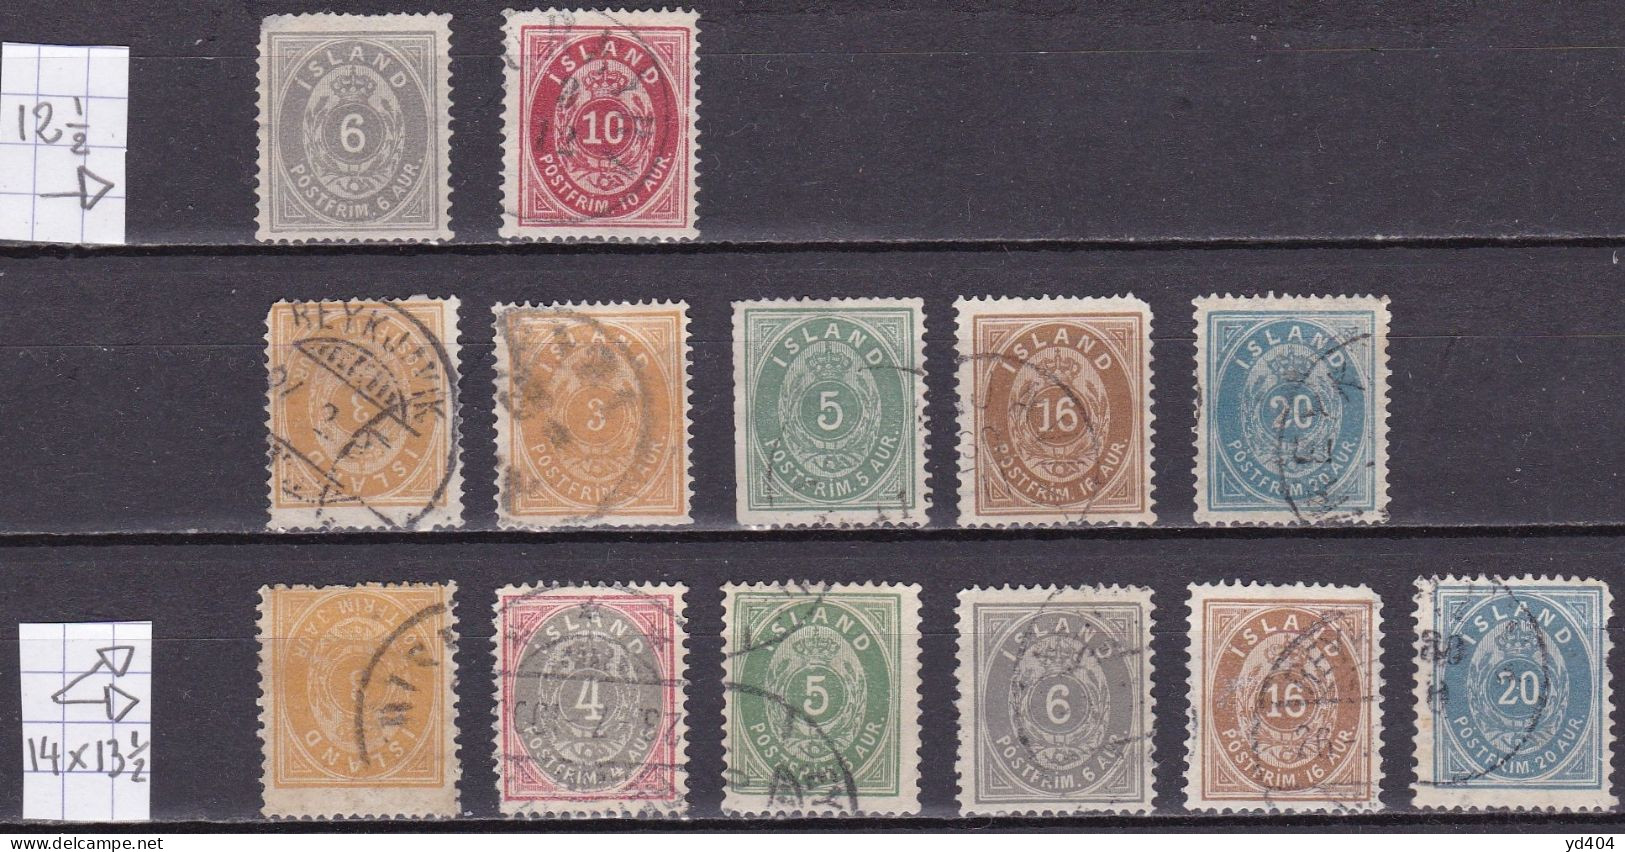 IS004 – ISLANDE – ICELAND – 1876/98 – NUMERAL VALUE LOT - SC # 10-28 USED 335 € - Used Stamps